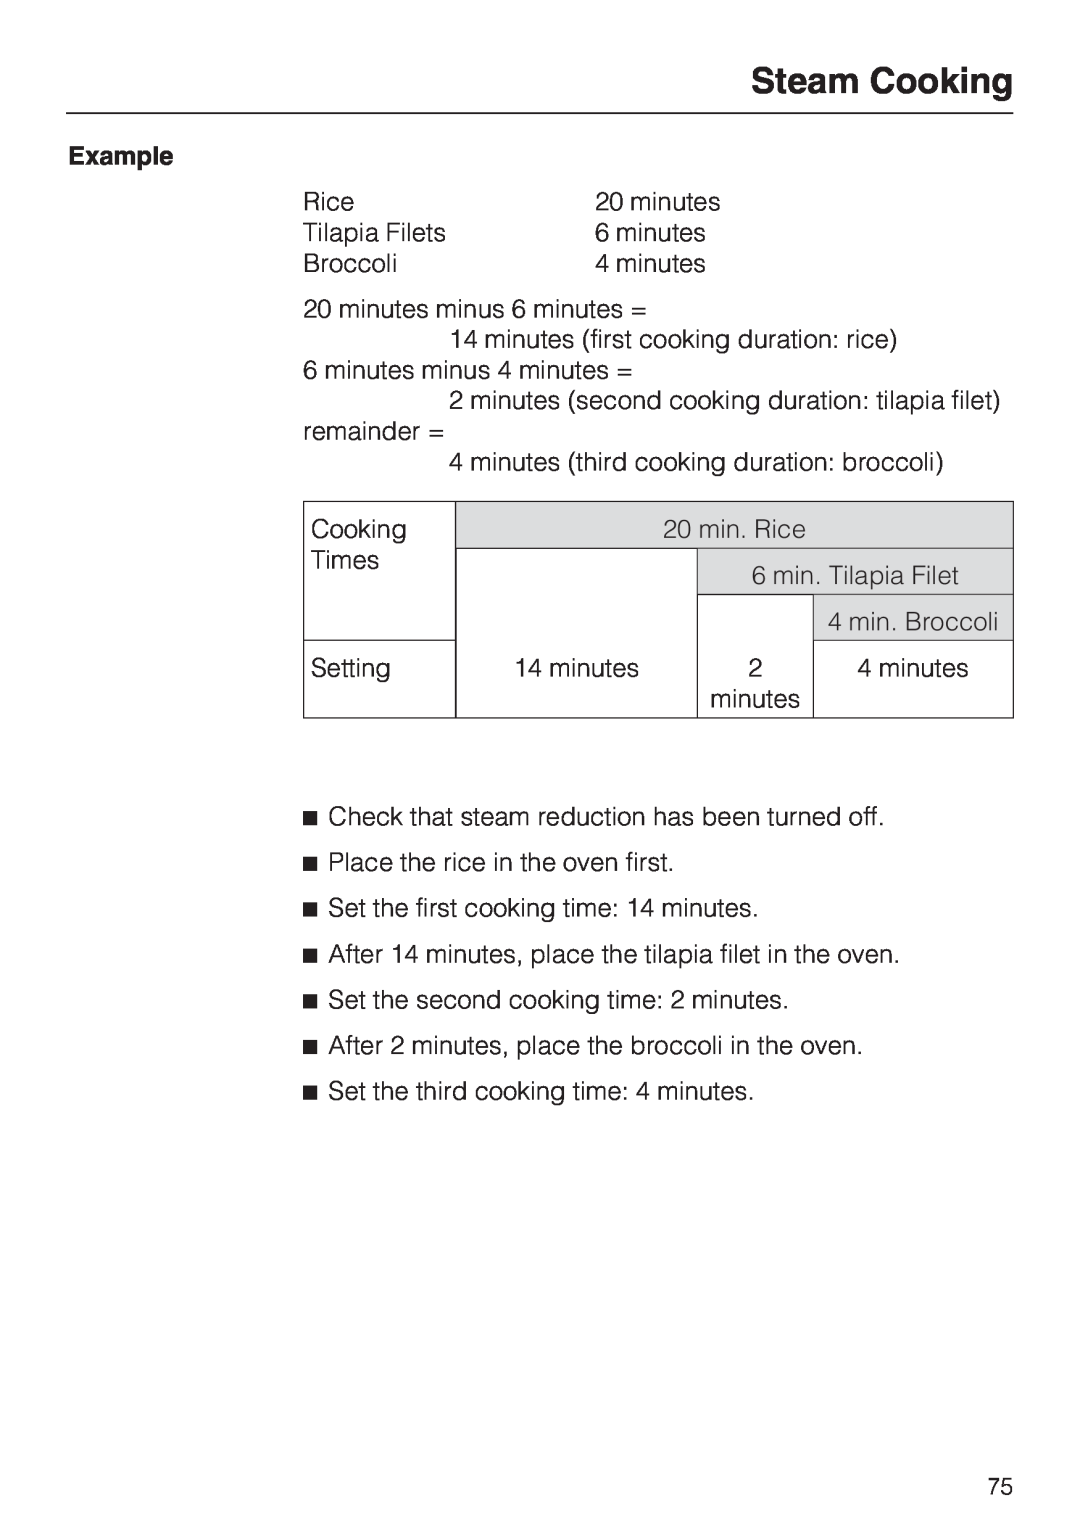 Miele 09 855 050 installation instructions Steam Cooking, Example 